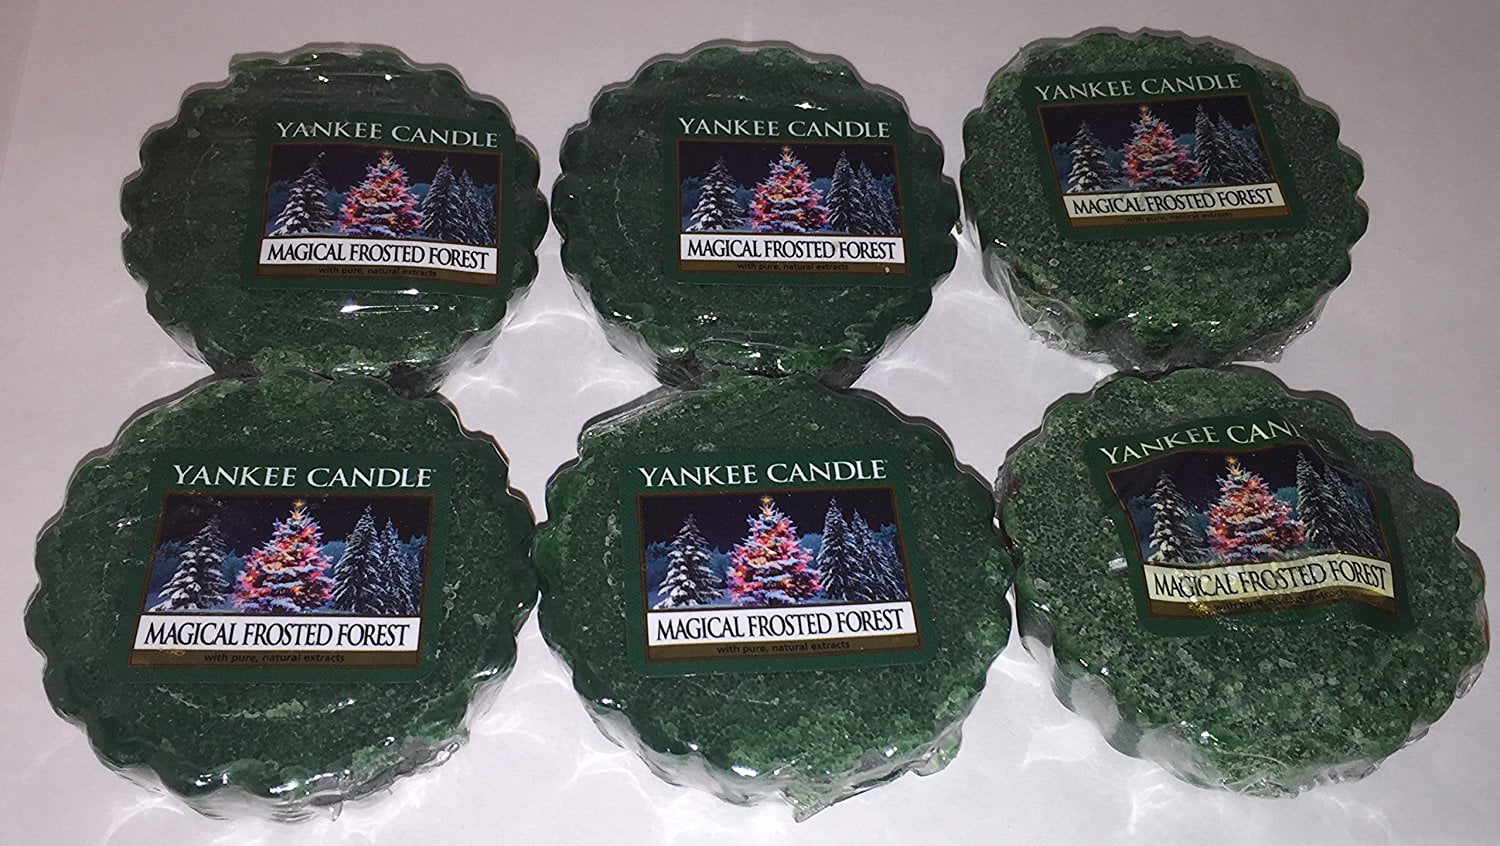 MAGICAL FROSTED FOREST Wax Melts Lot of 11 Green New Yankee Candle Tarts 